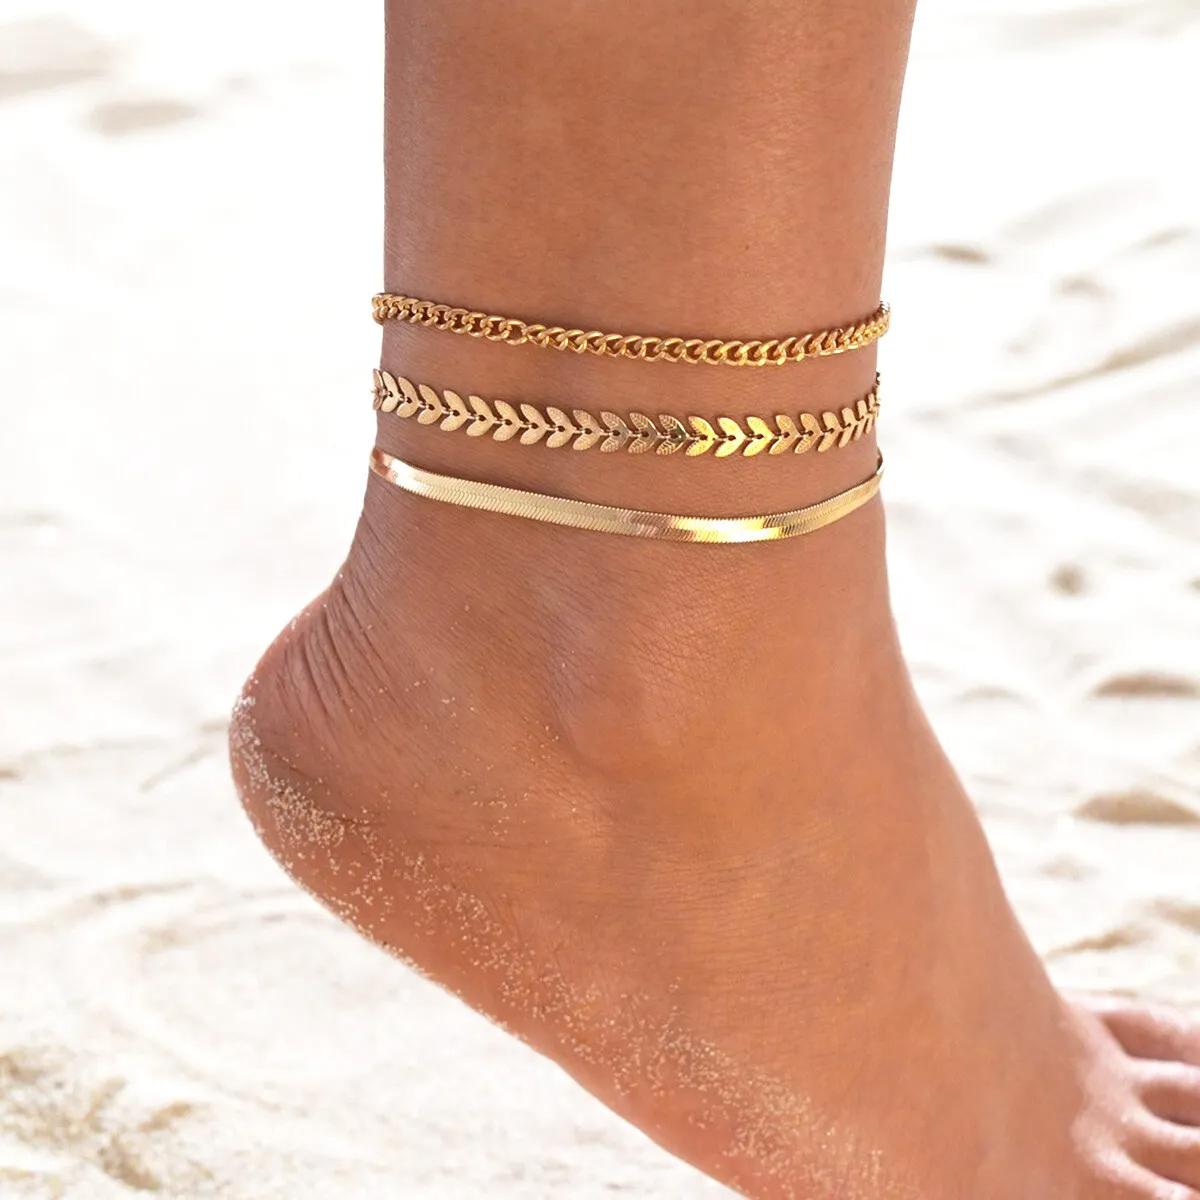 Gold ankle bracelets, also known as anklets, are versatile and timeless accessories that can add a touch of elegance and charm to any outfit.